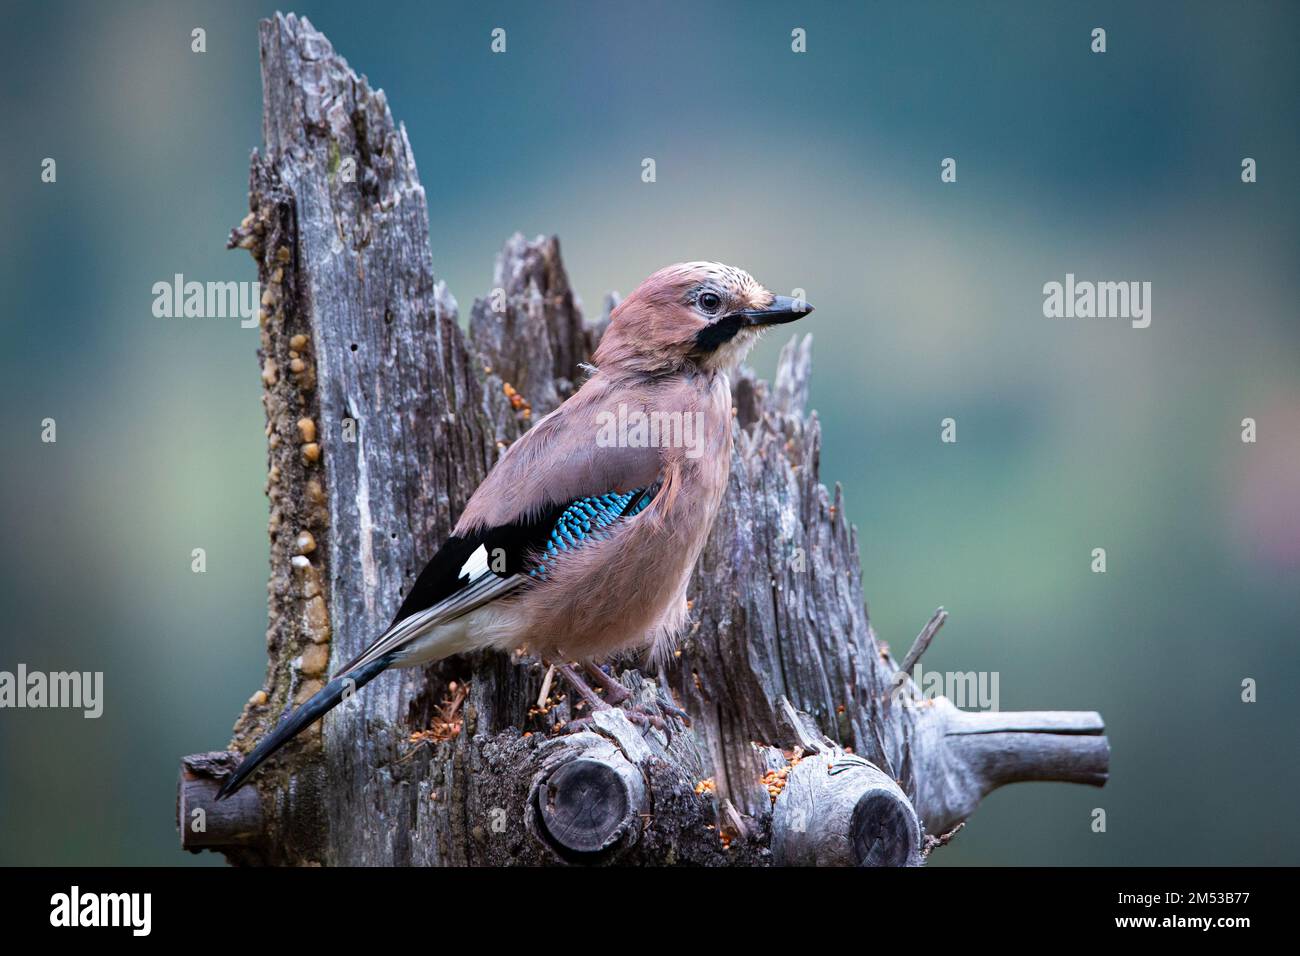 An adorable blue jay (Cyanocitta cristata) on the tree trunk in closeup Stock Photo